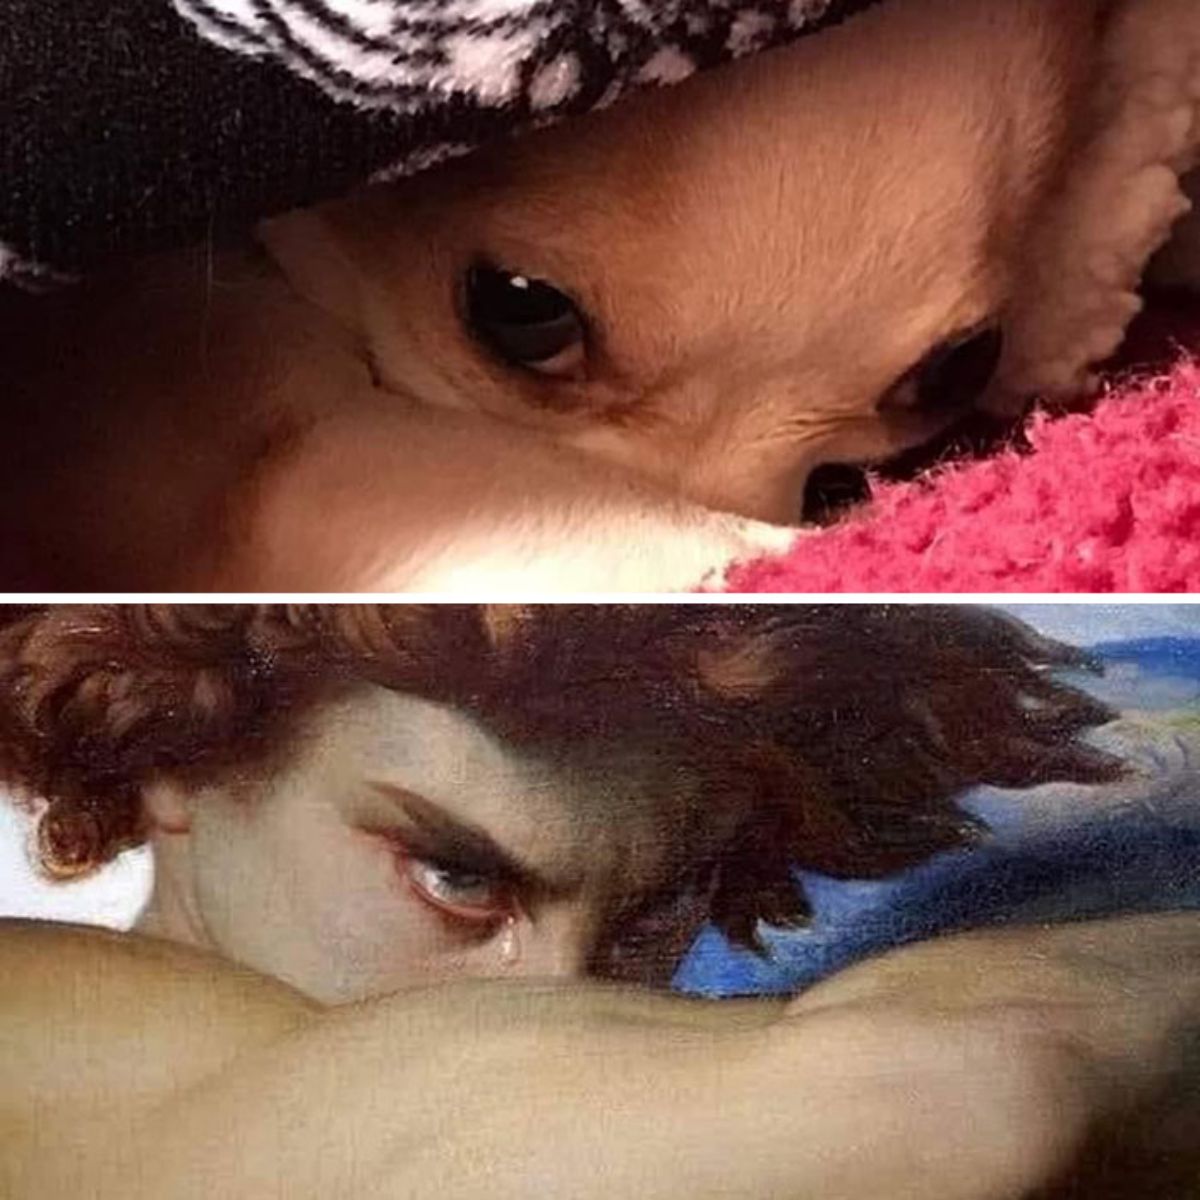 first photo of a dog's eyes under a blanket looking angry and the second photo of the eyes of someone in a classical painting